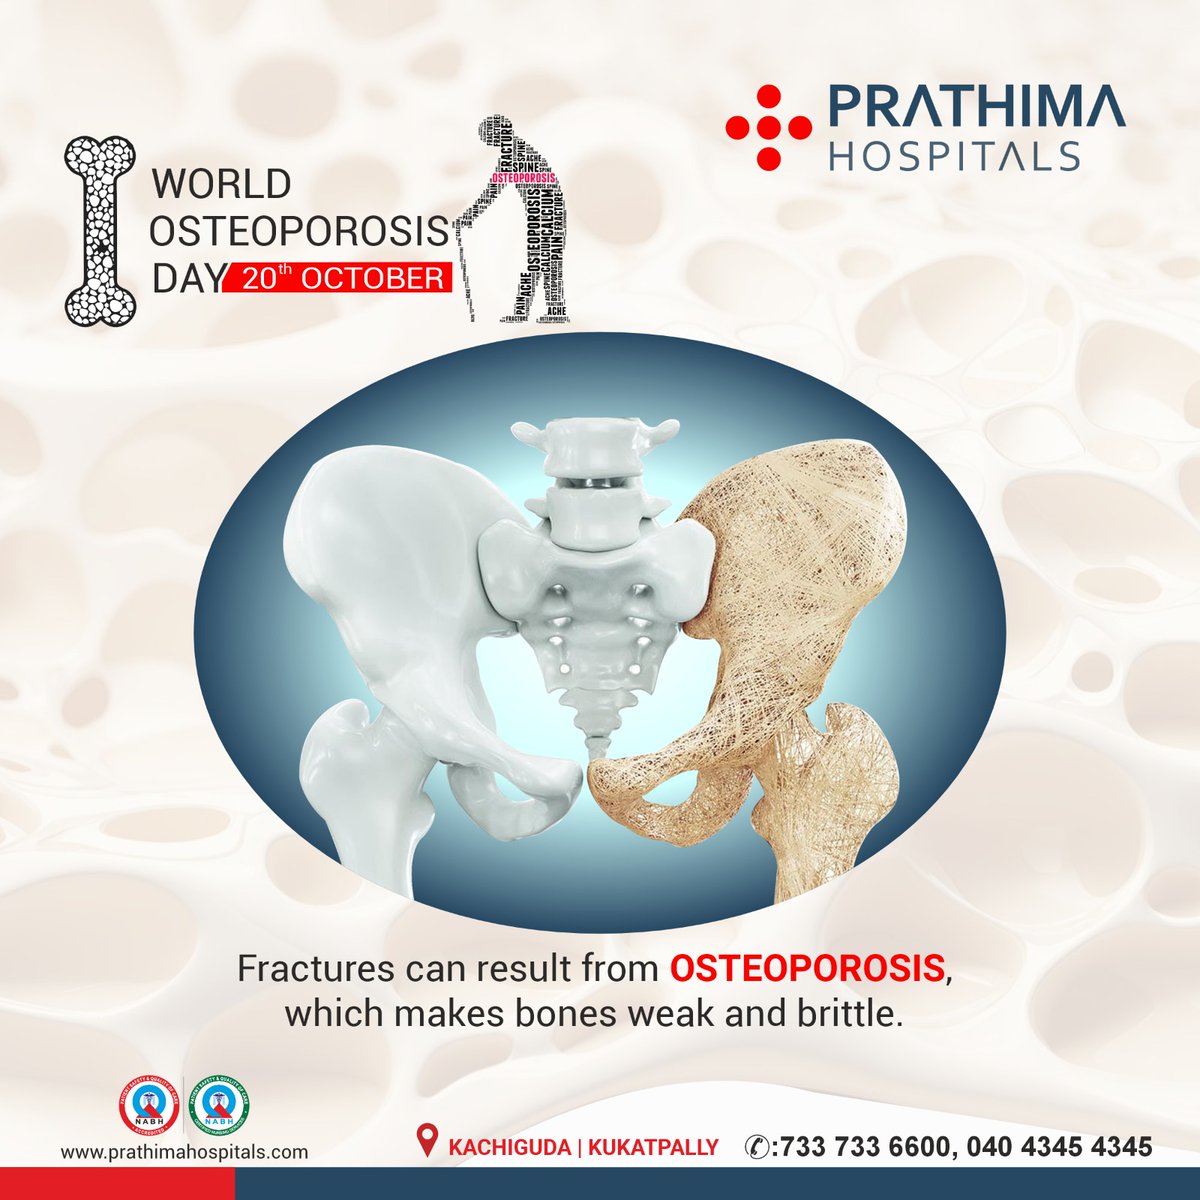 Fractures can result from OSTEOPOROSIS, which makes bones weak and brittle.

#OsteoporosisDay #BoneHealth #StrongBones #PreventOsteoporosis #HealthyAging #FracturePrevention #BonesMatter #CalciumIntake #OsteoporosisAwareness #prathimahospitals #ph